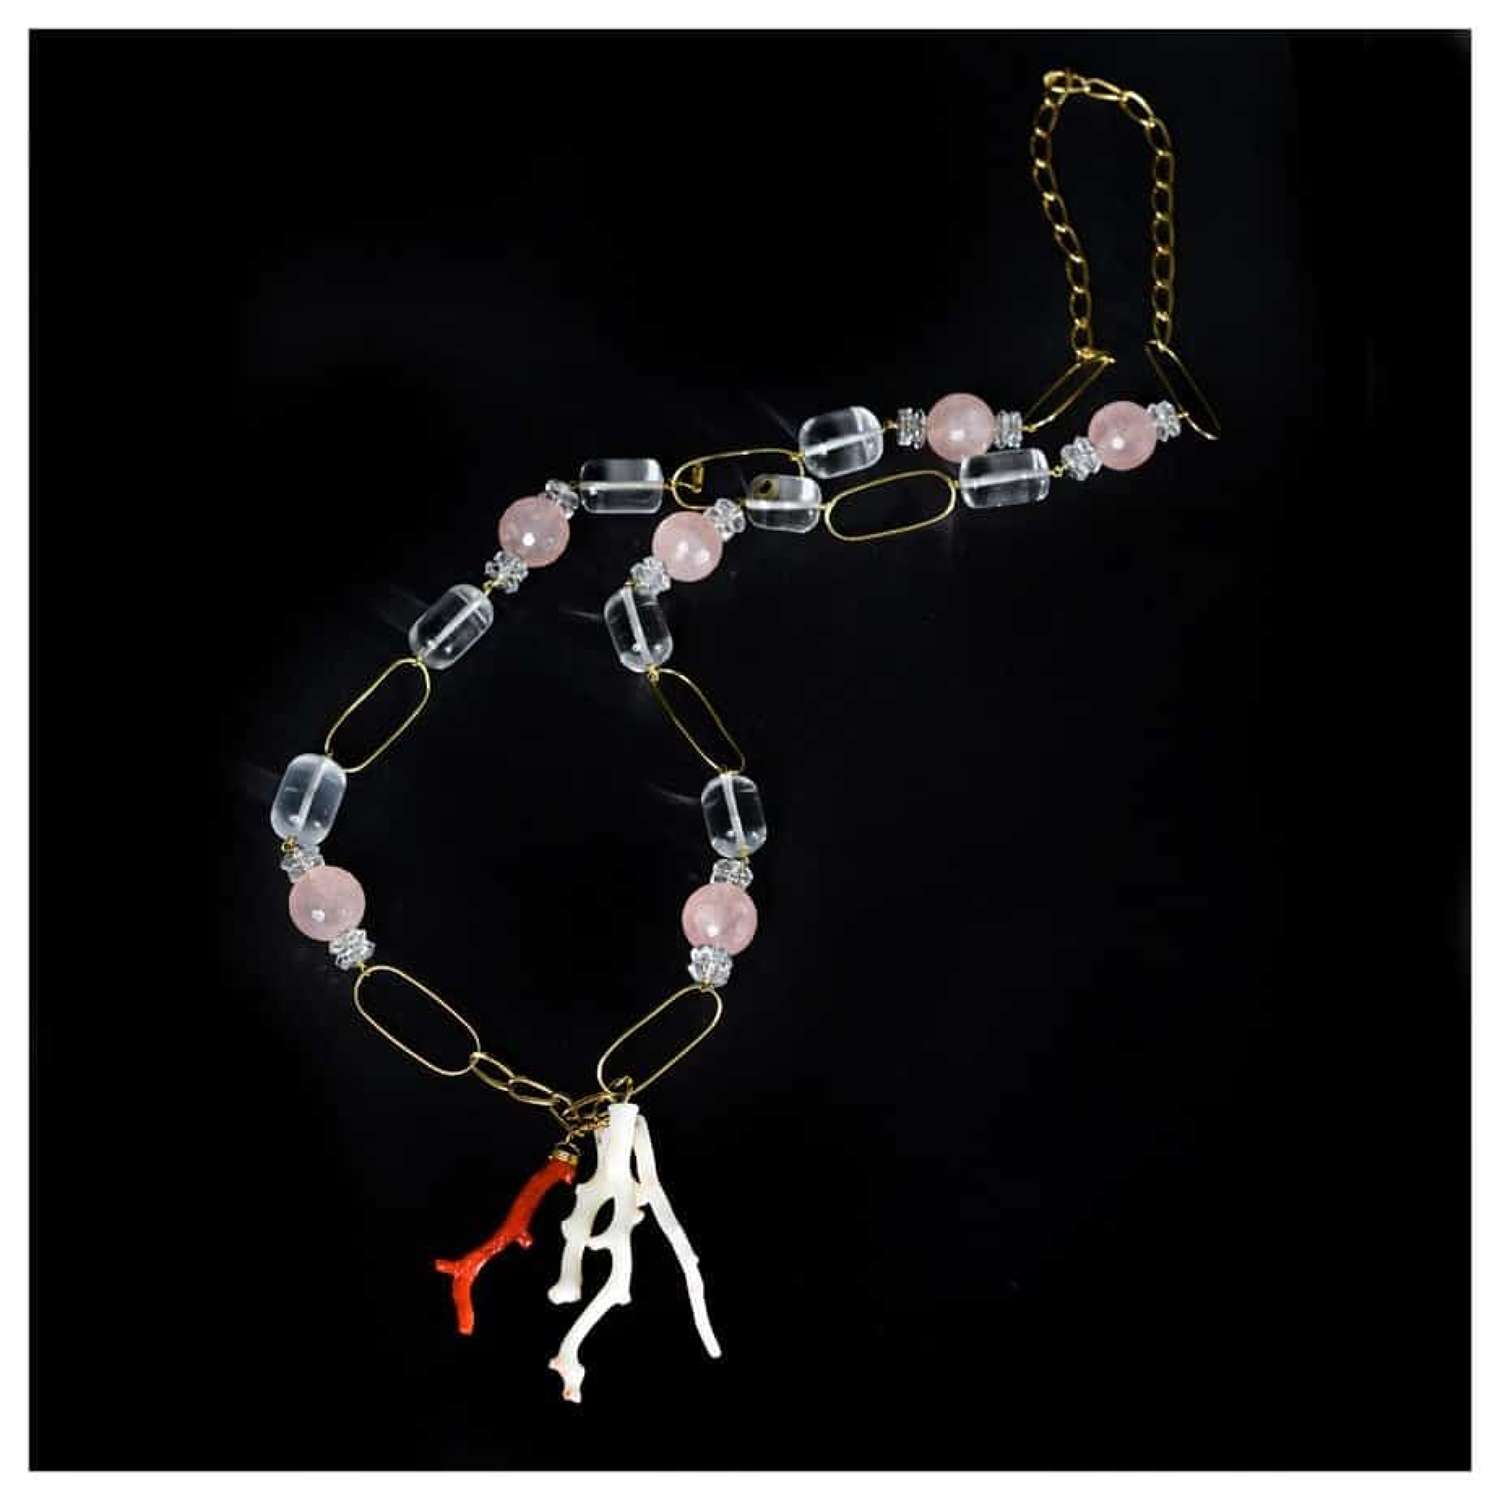 A coral, rock crystal, rose quartz and gold necklace by Guerreiro